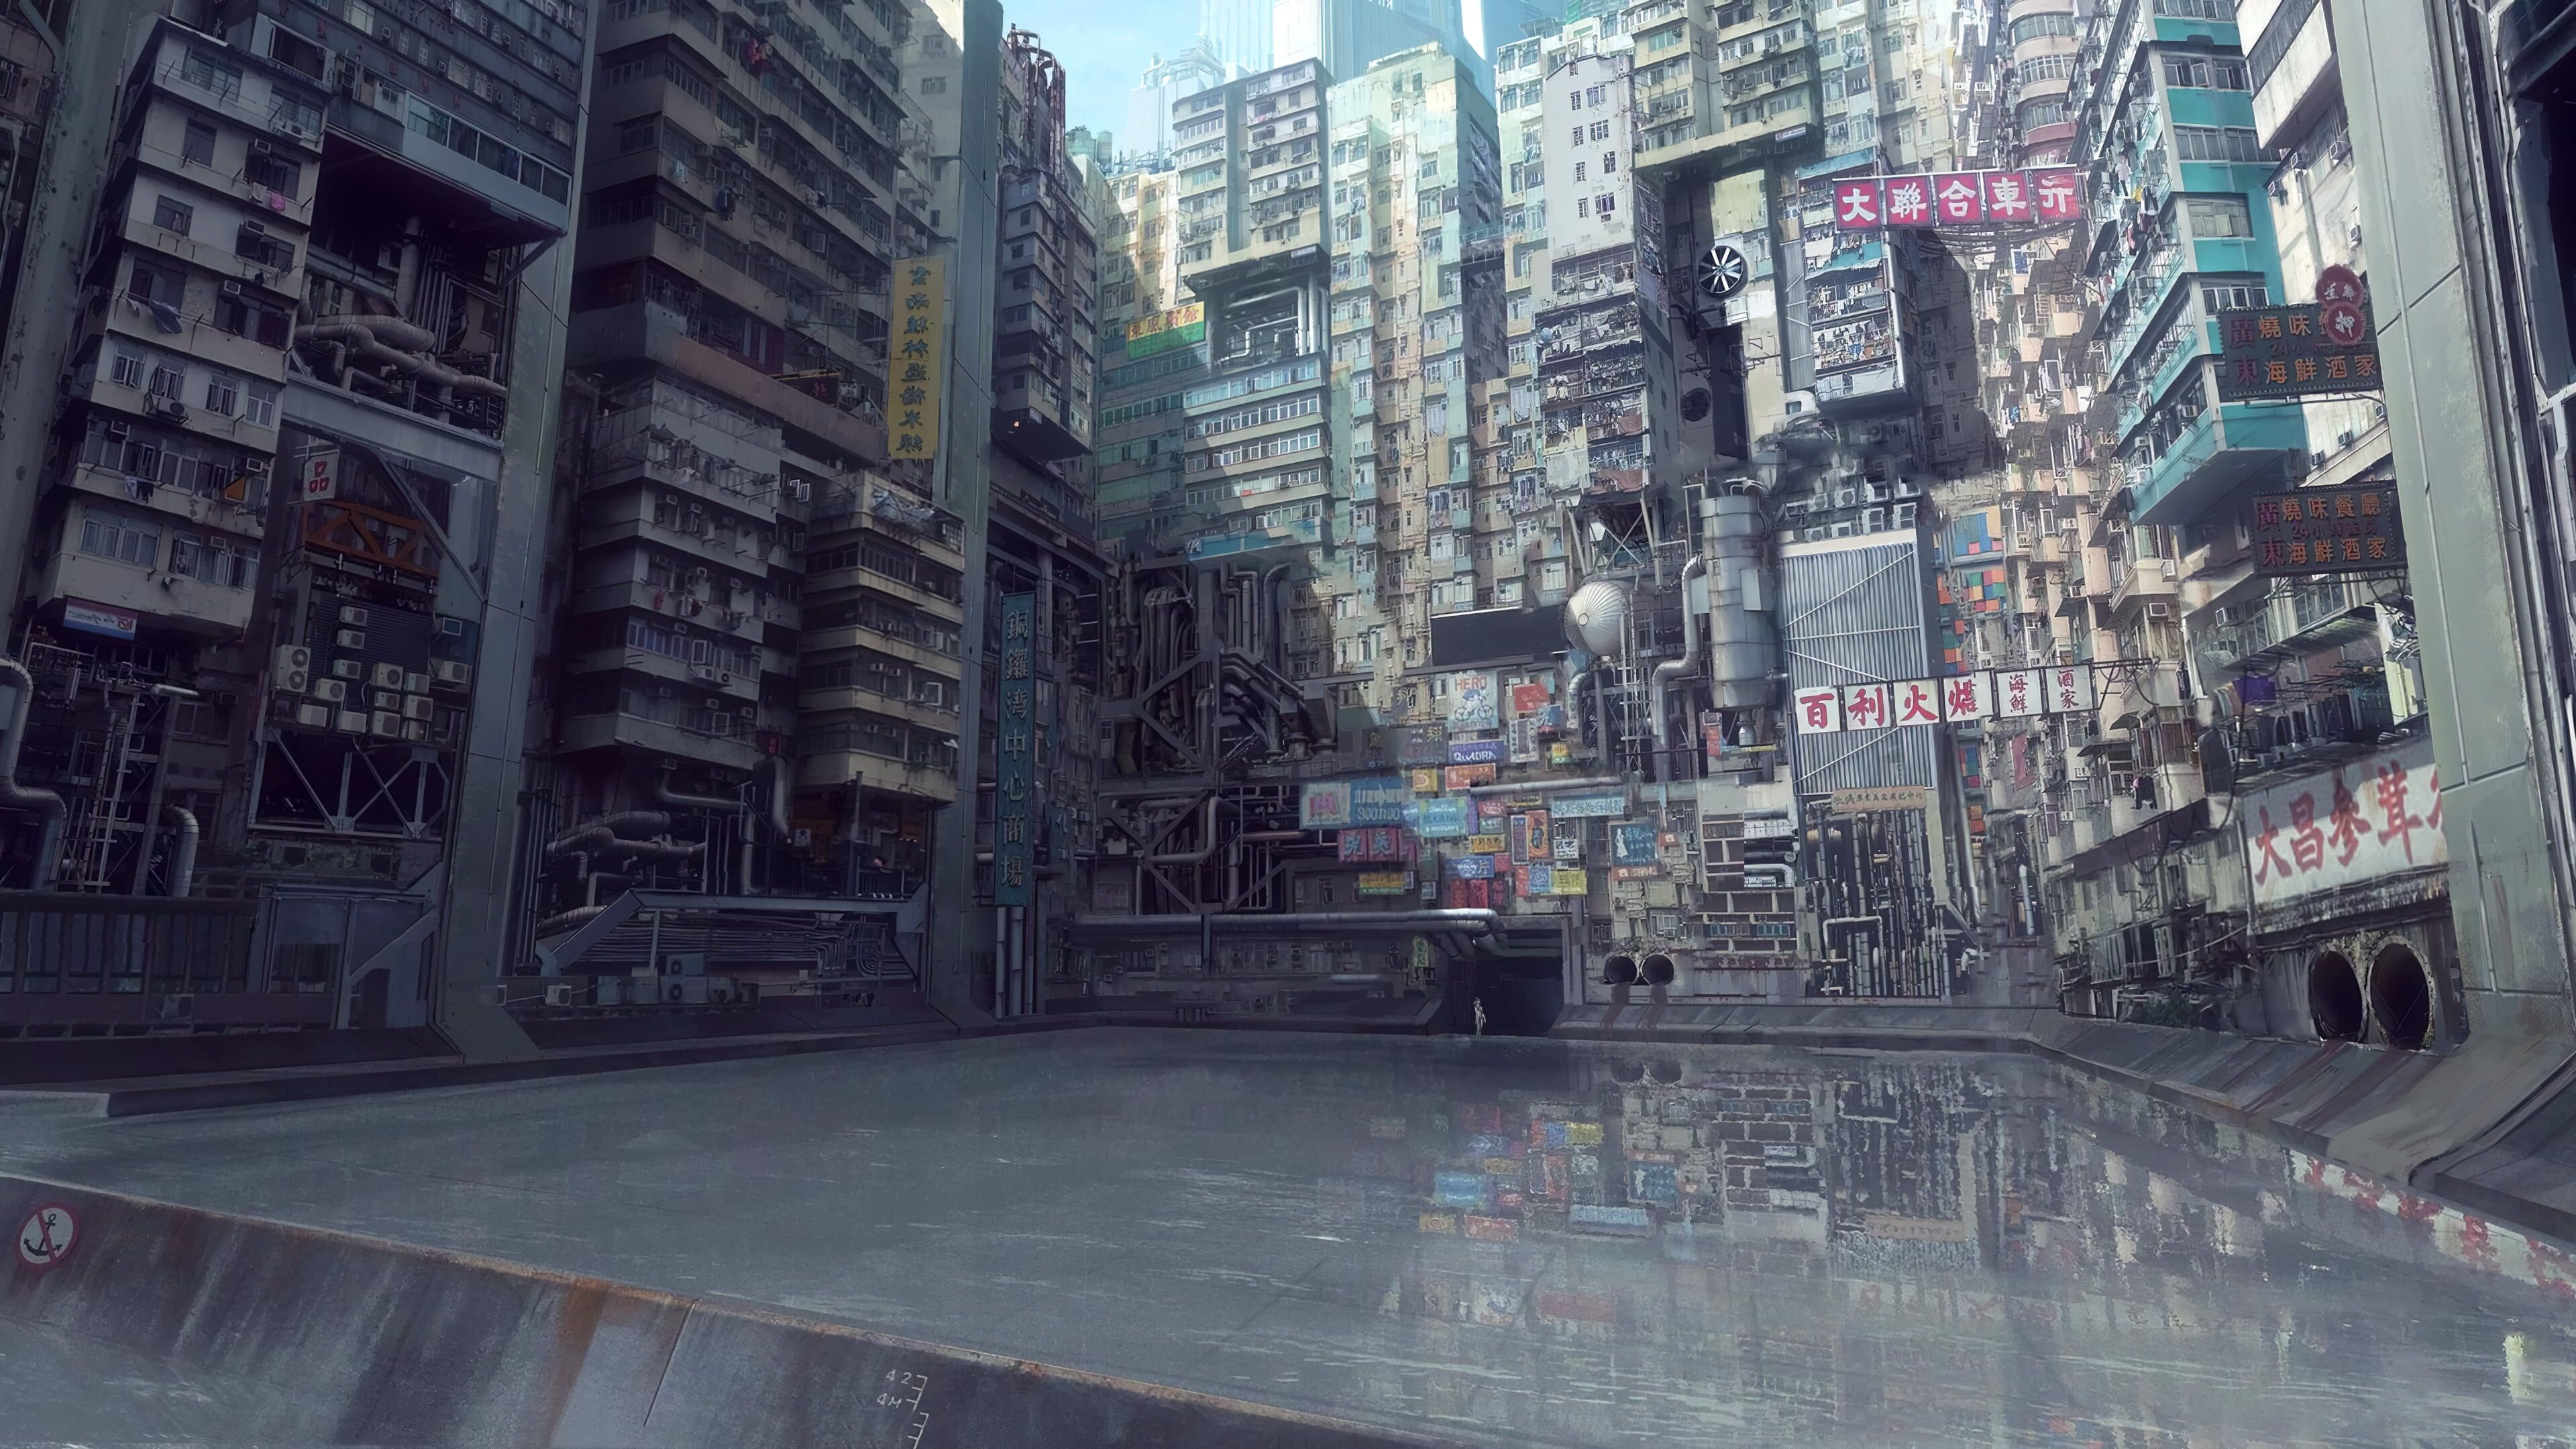 Ghost in the Shell (Anime): Japanese cyberpunk, Stand Alone Complex, Written and directed by Kenji Kamiyama. 3840x2160 4K Wallpaper.